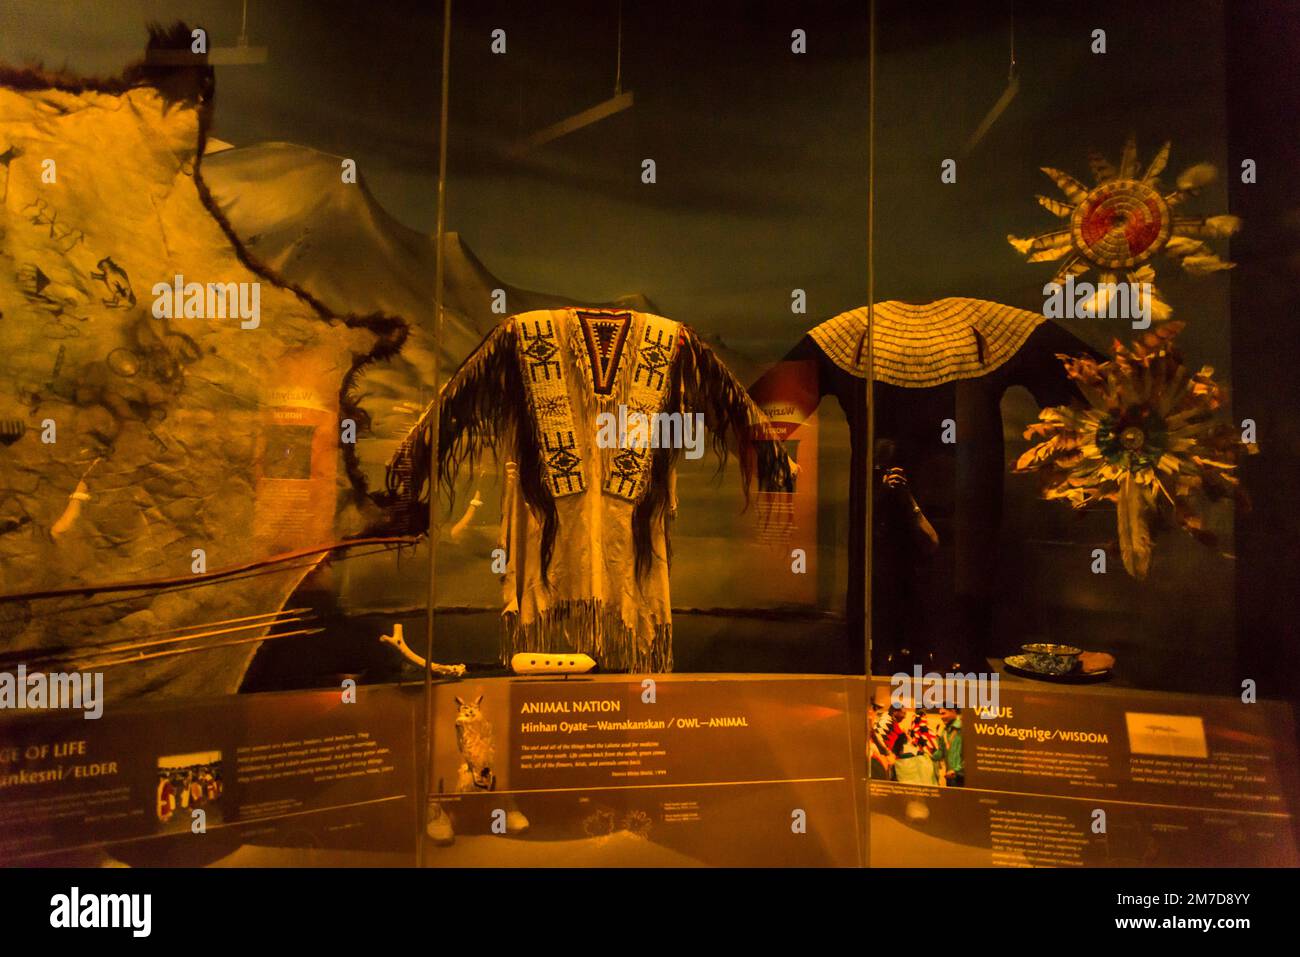 Exhibits representing Native American culture and tradition, National Museum of the American Indian, Washington, D.C., USA Stock Photo